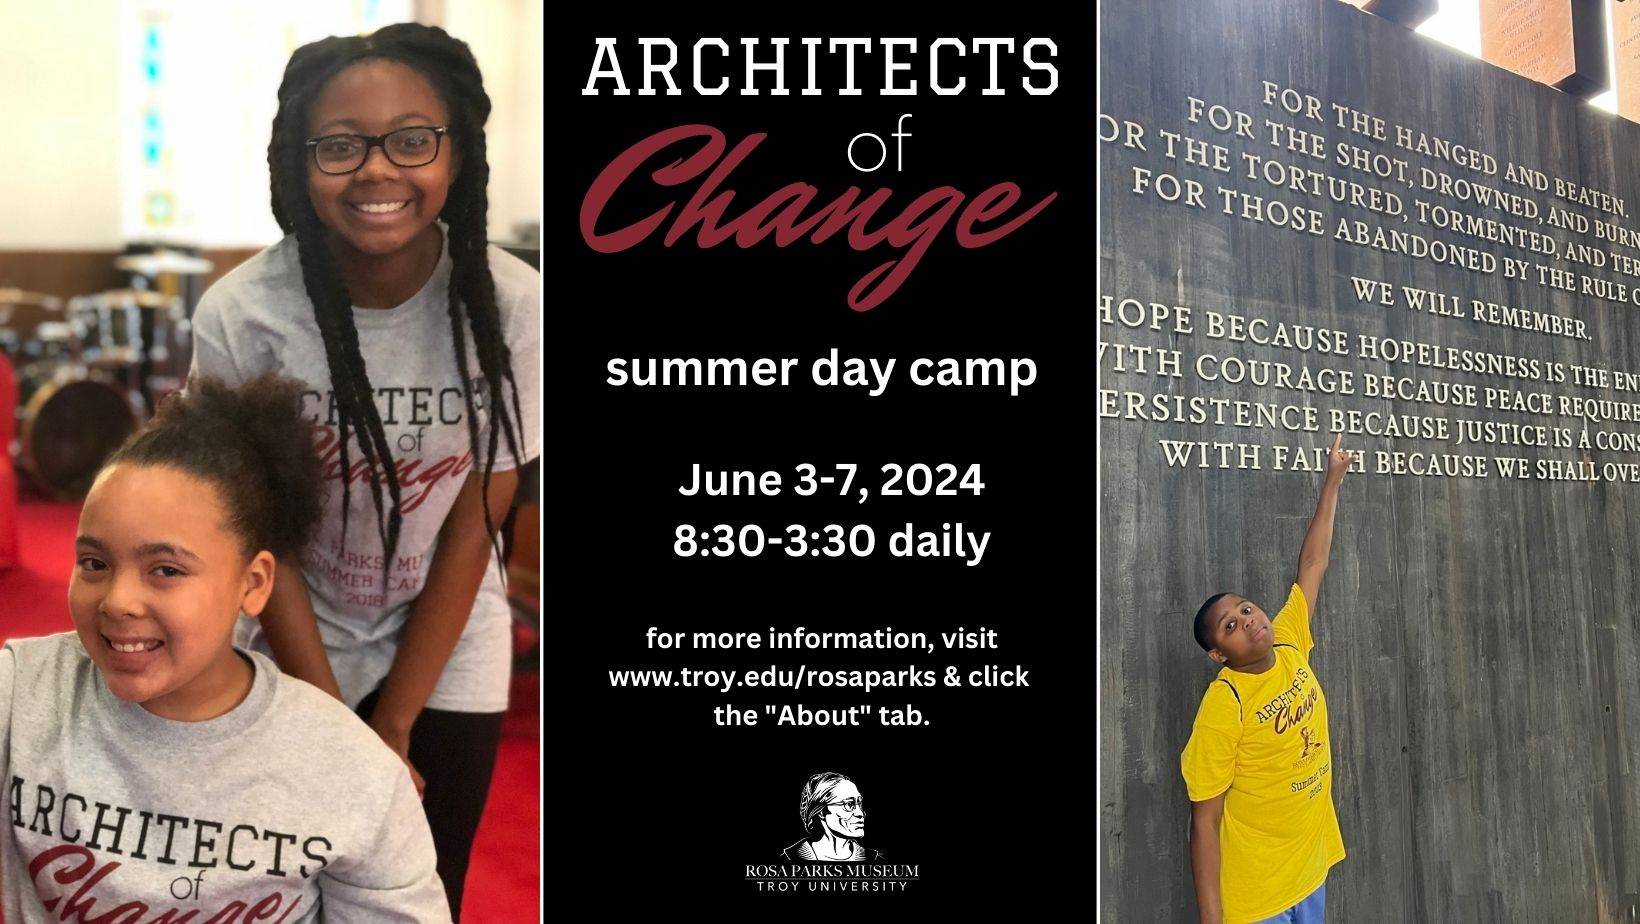 2024 Rosa Parks Museum Architects of Change summer camp